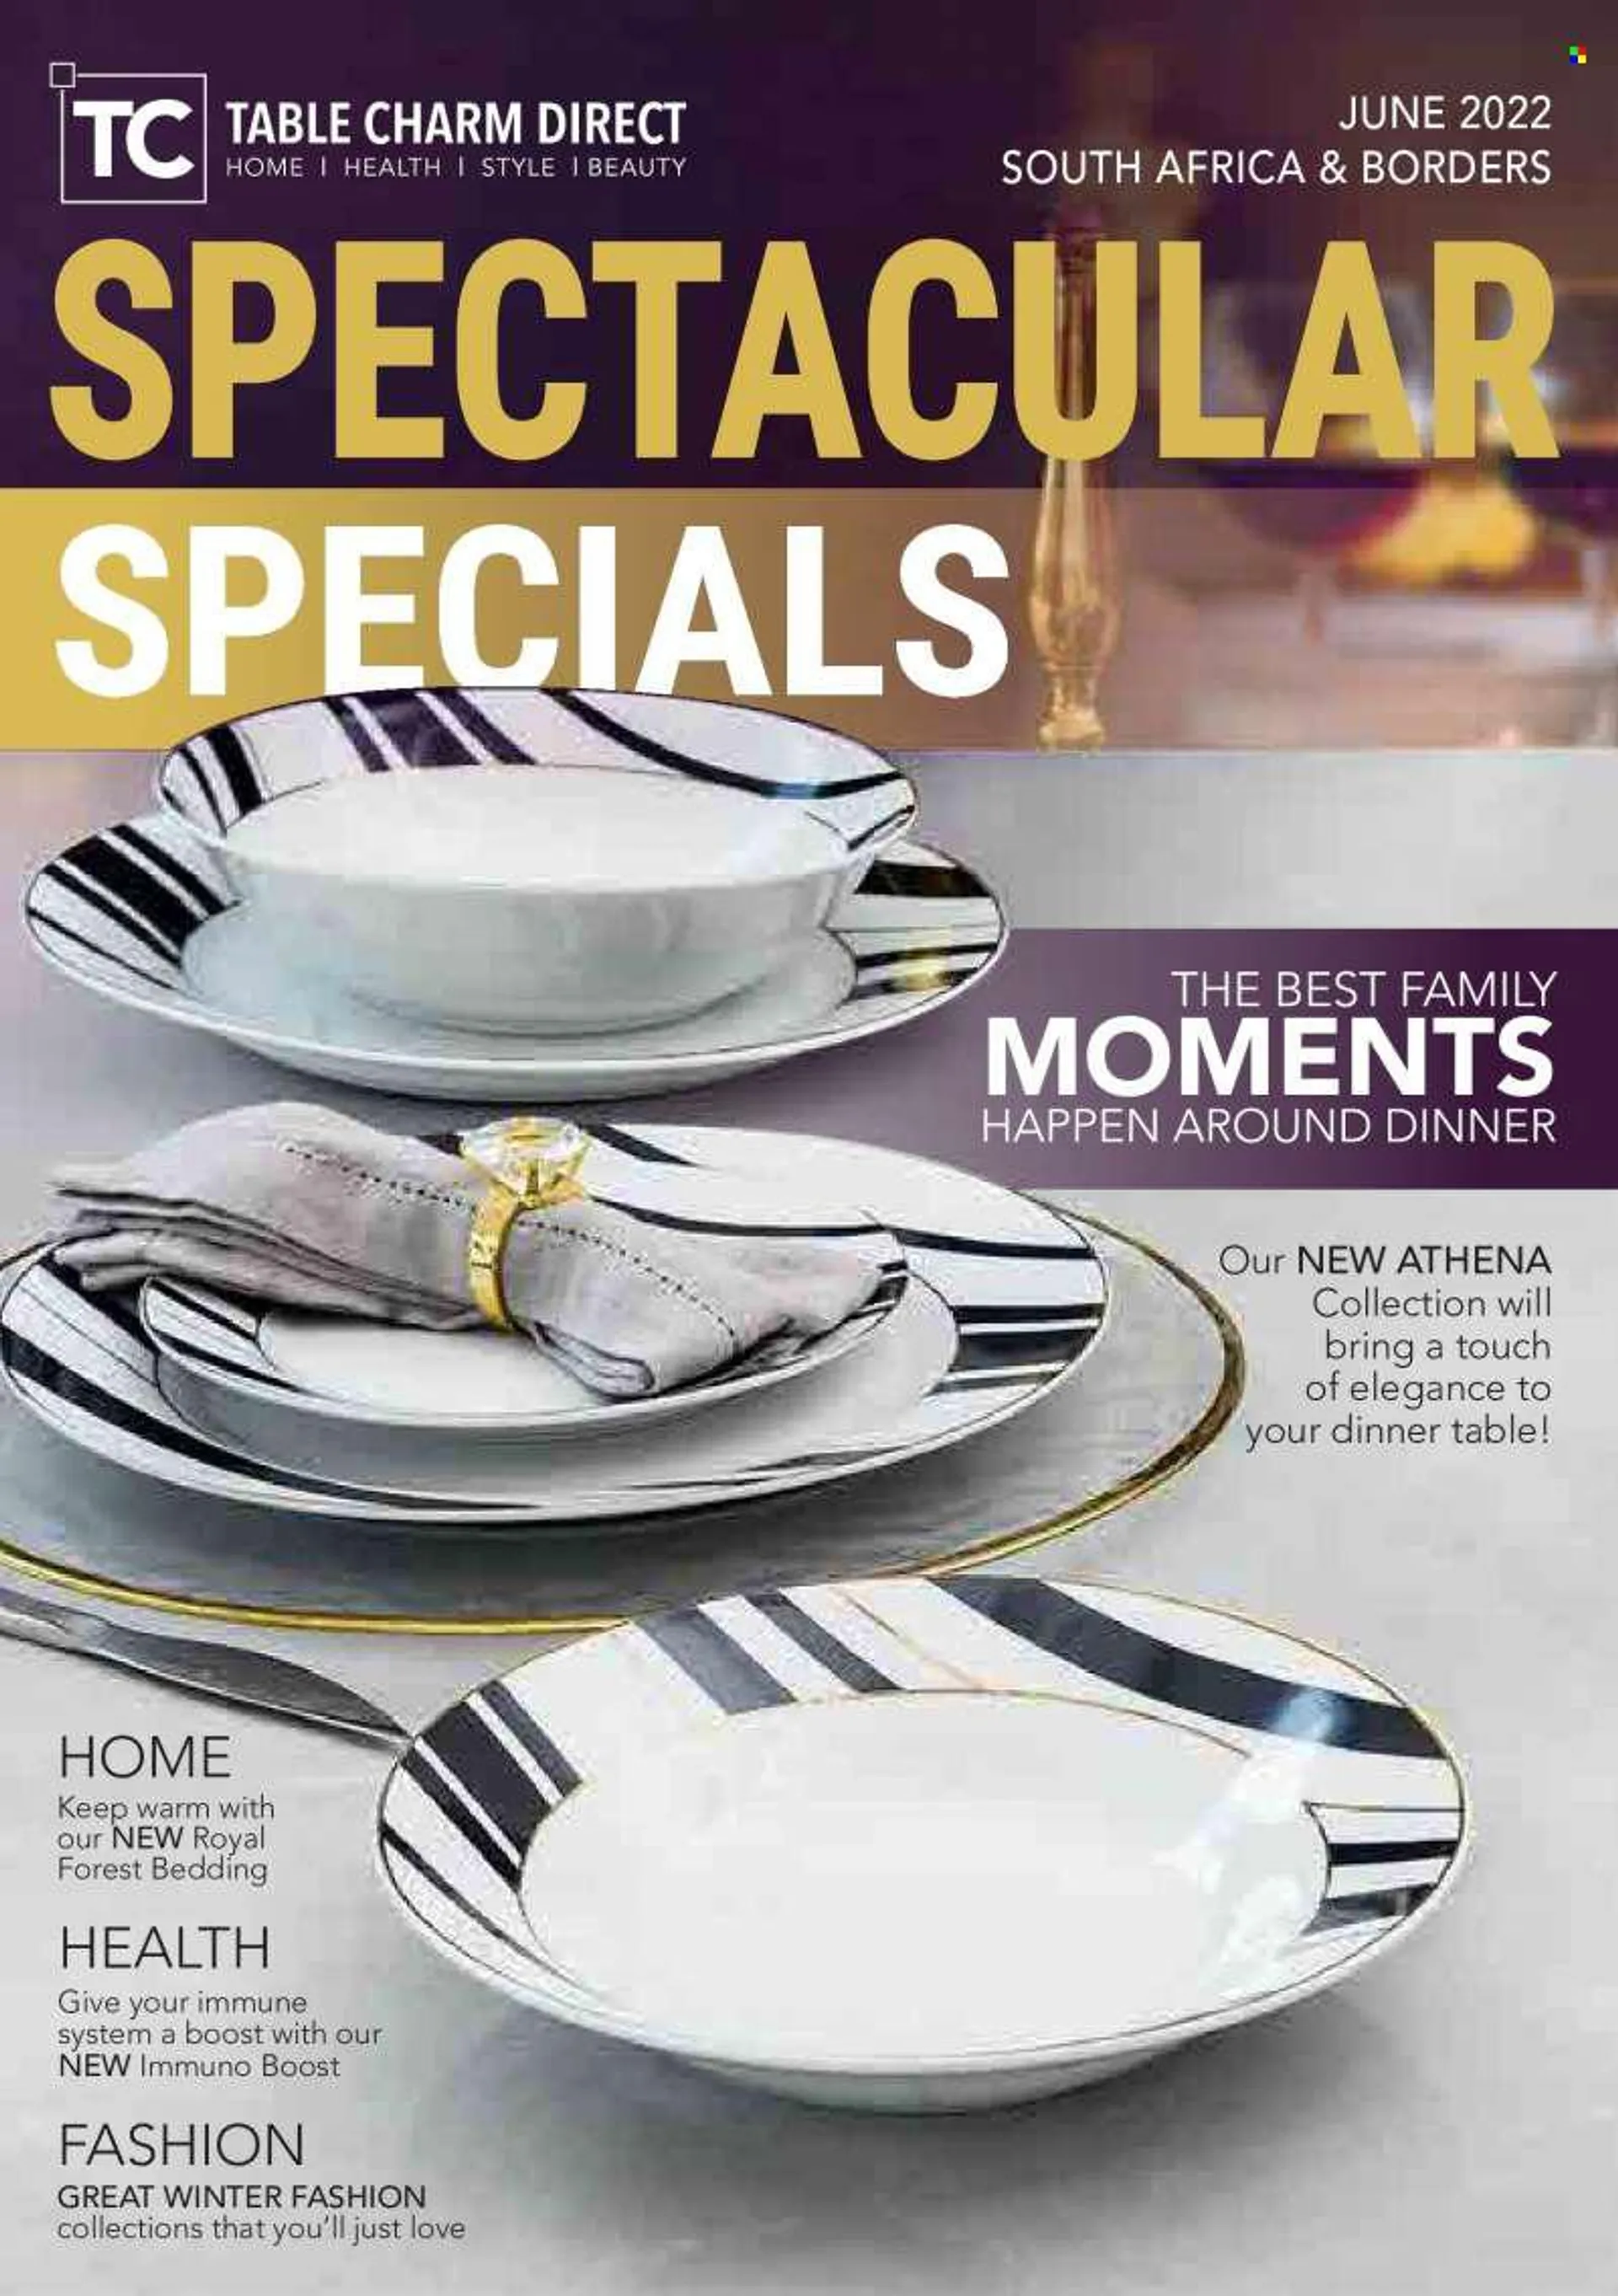 Table Charm Direct catalogue  - 01/06/2022 - 30/06/2022. - 1 June 30 June 2022 - Page 2